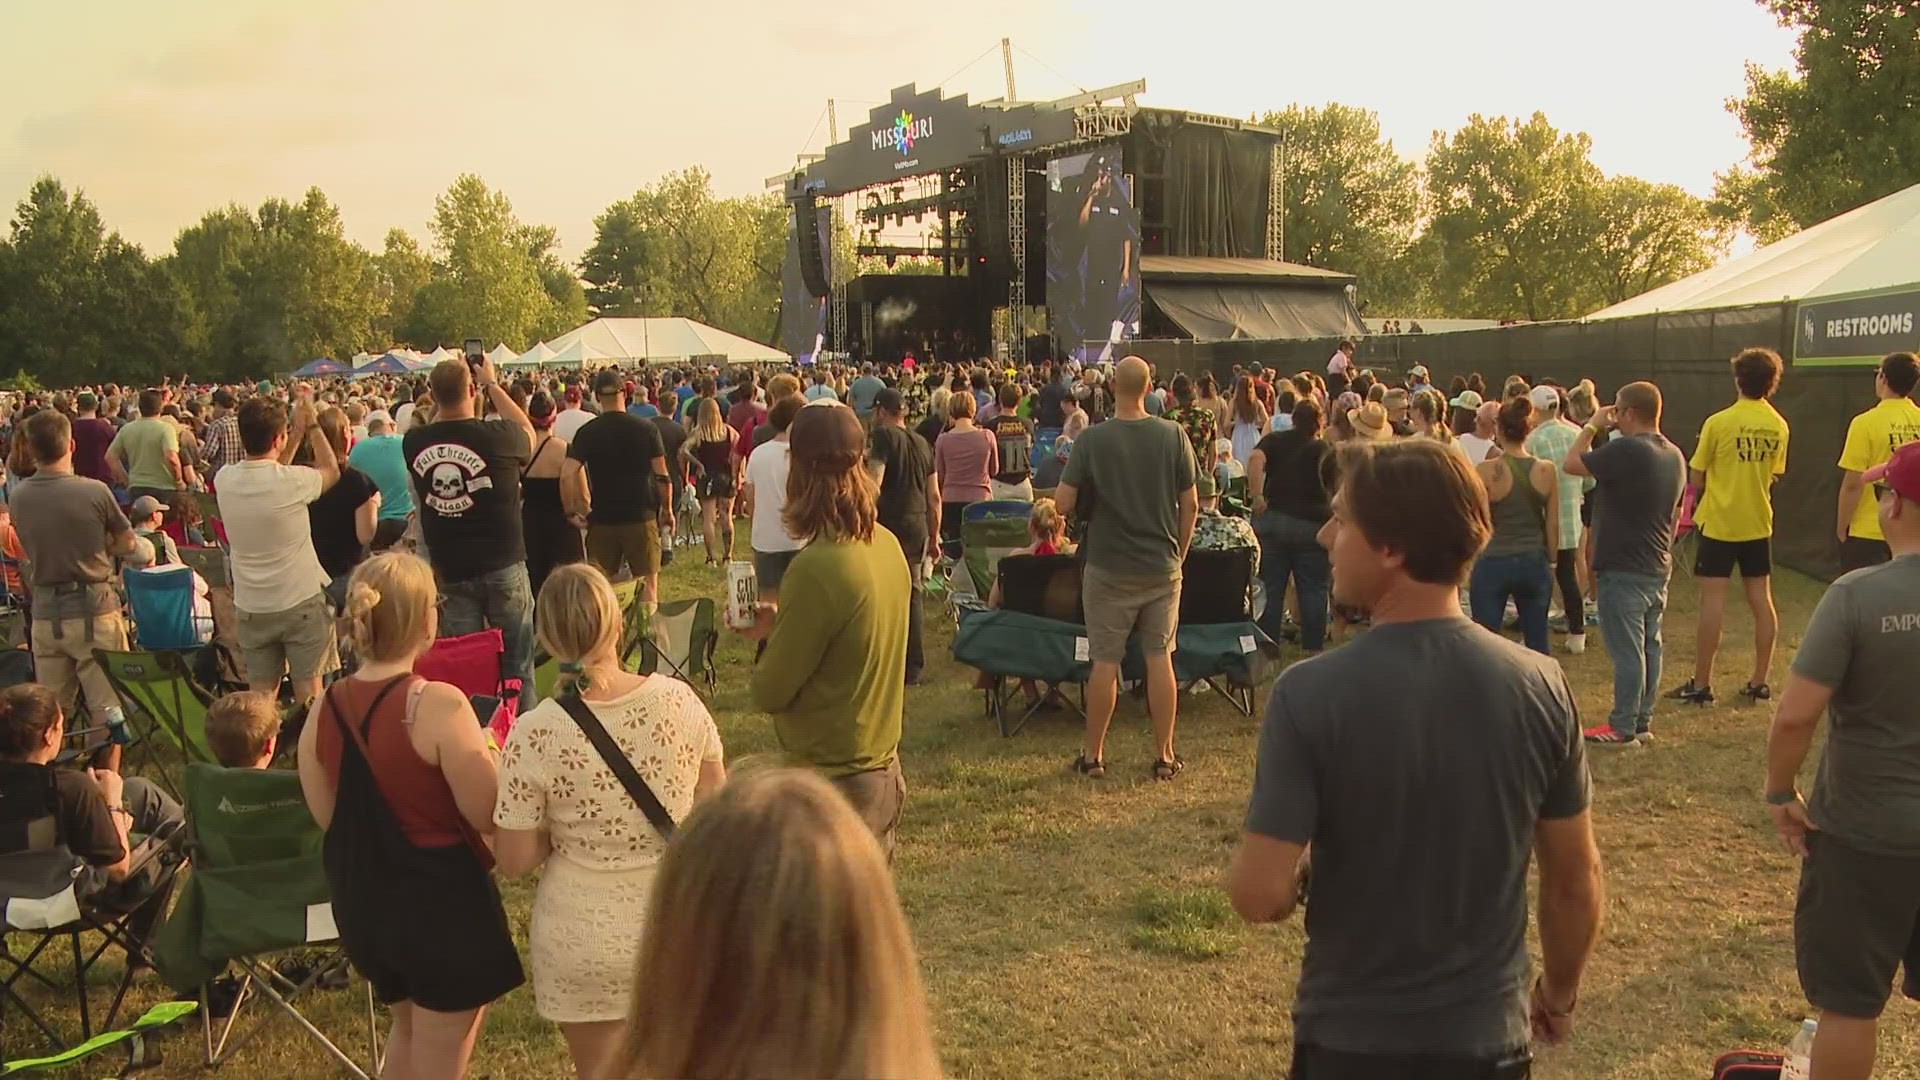 Evolution Festival drew in thousands of people together and brought an economic boost to St. Louis. It featured big performers like Brandi Carlile and Ice Cube.